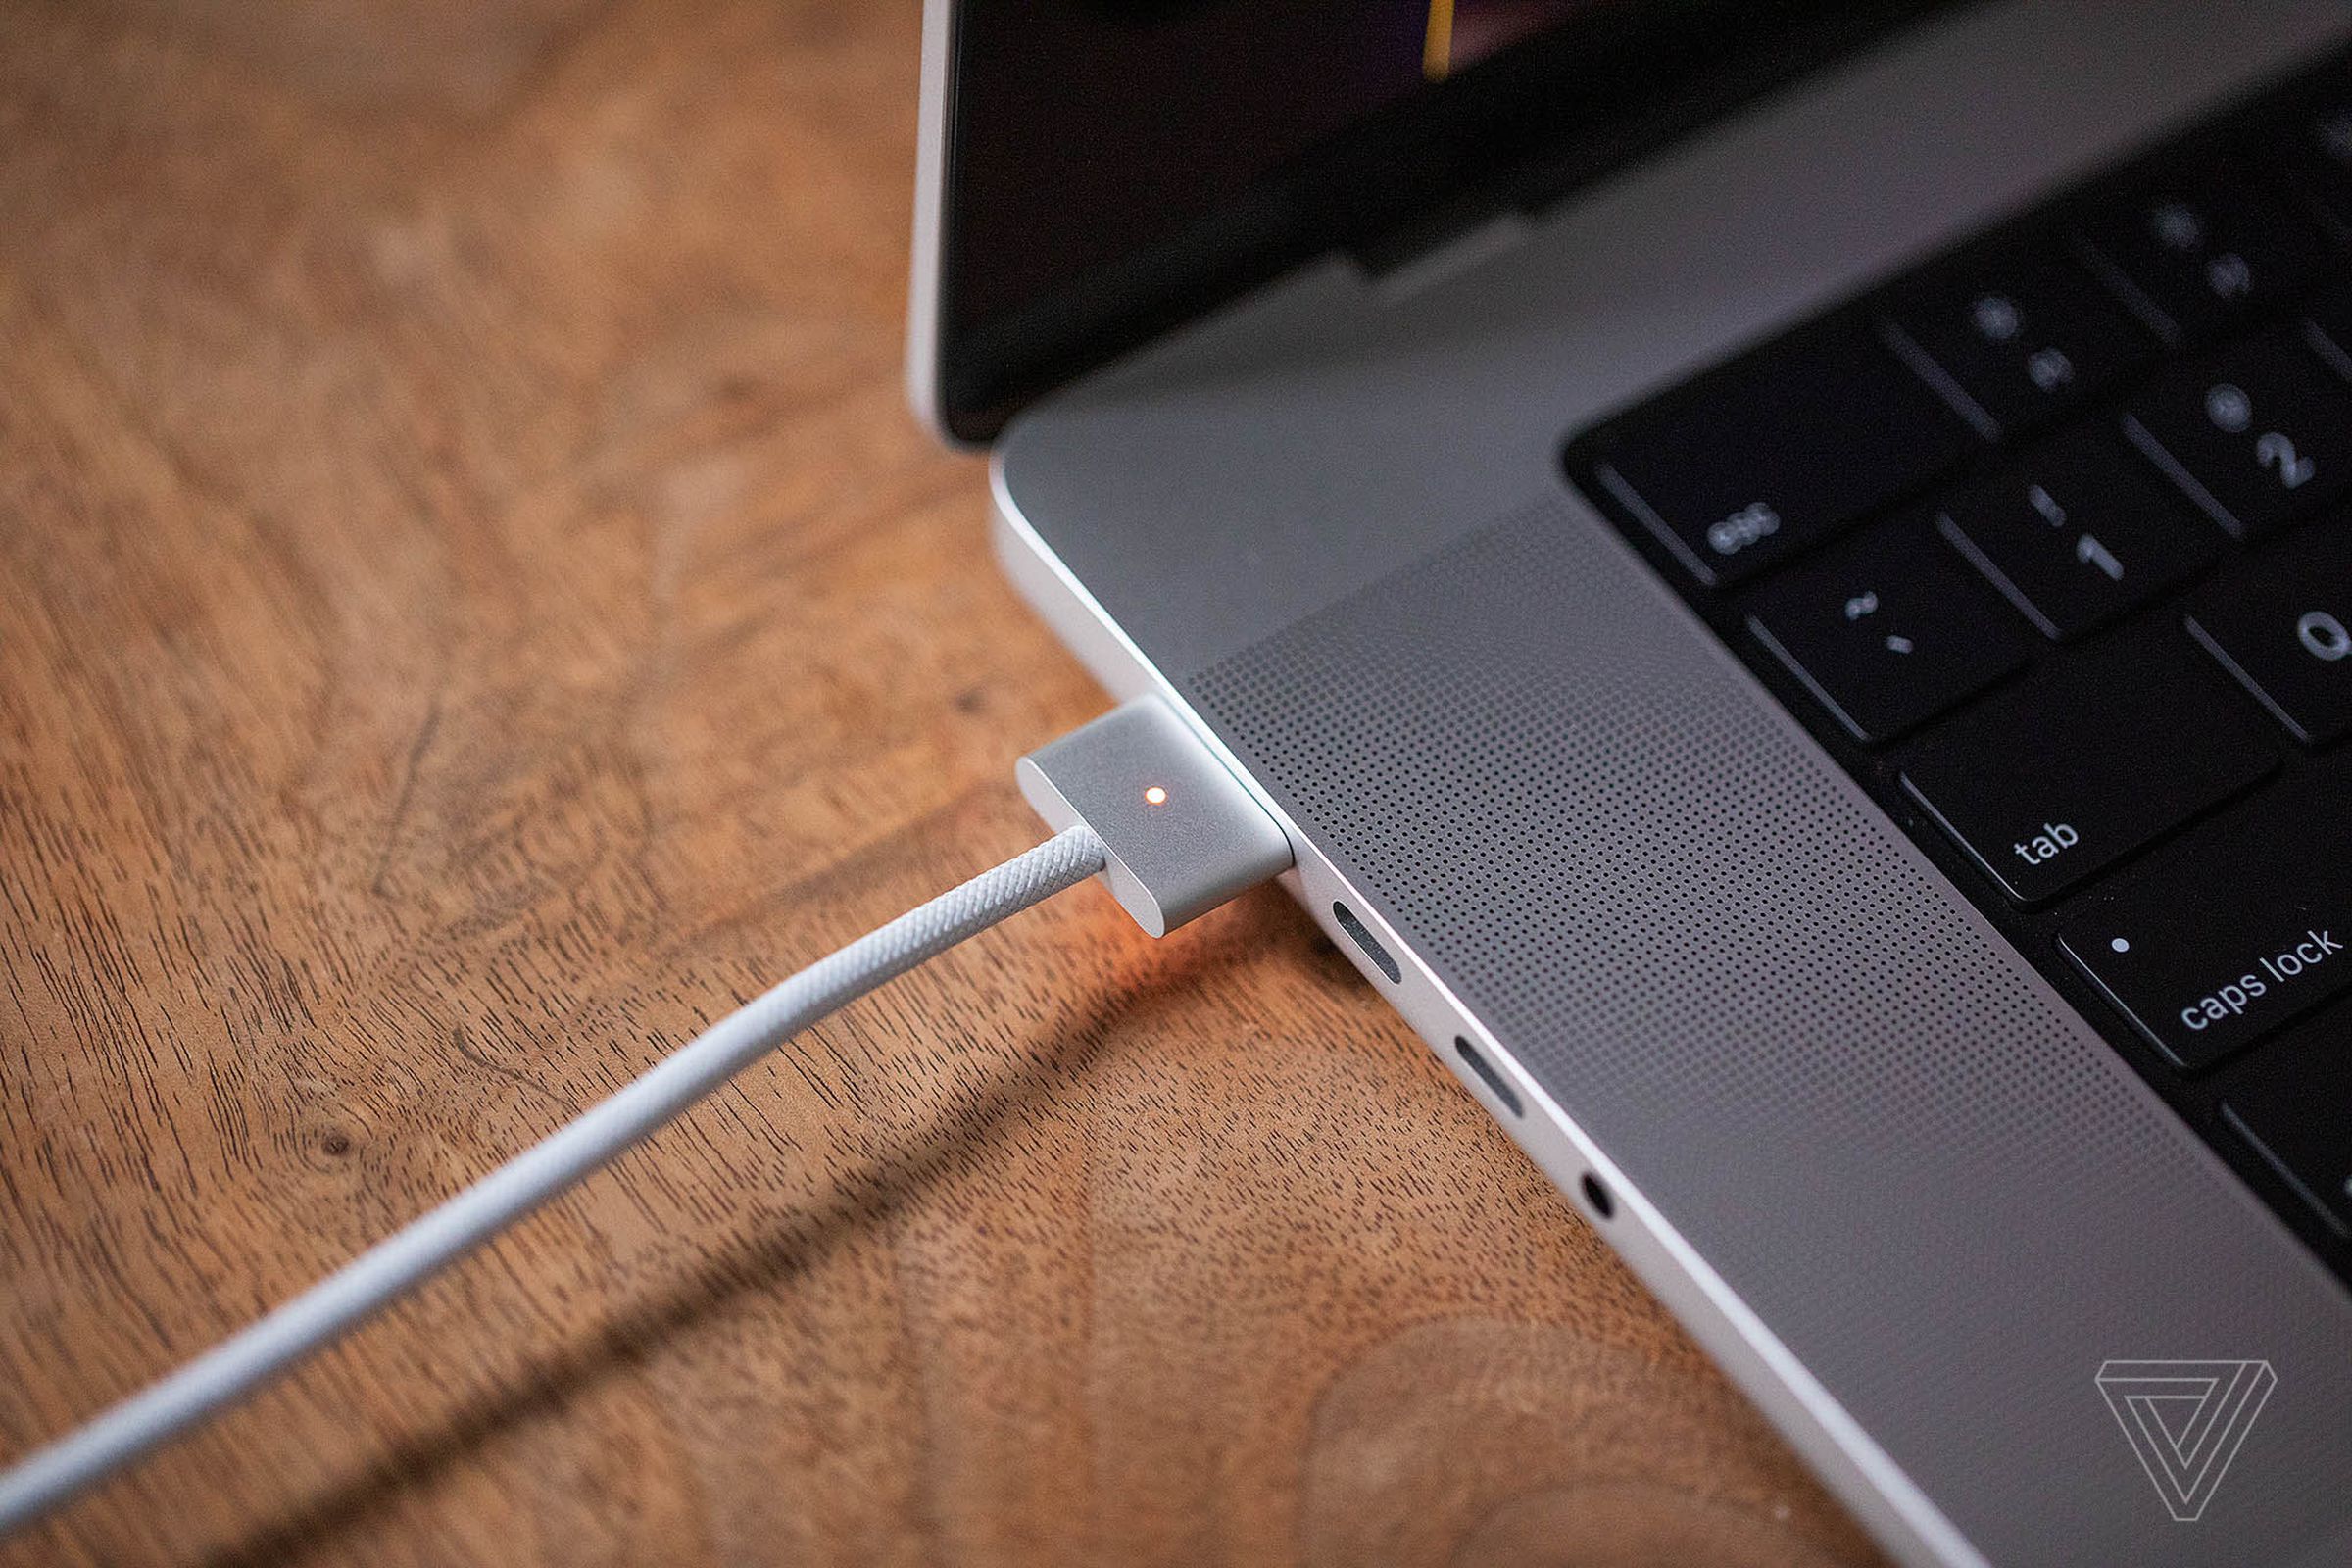 The new MagSafe 3 cable plugged in to the new MacBook Pro 16.